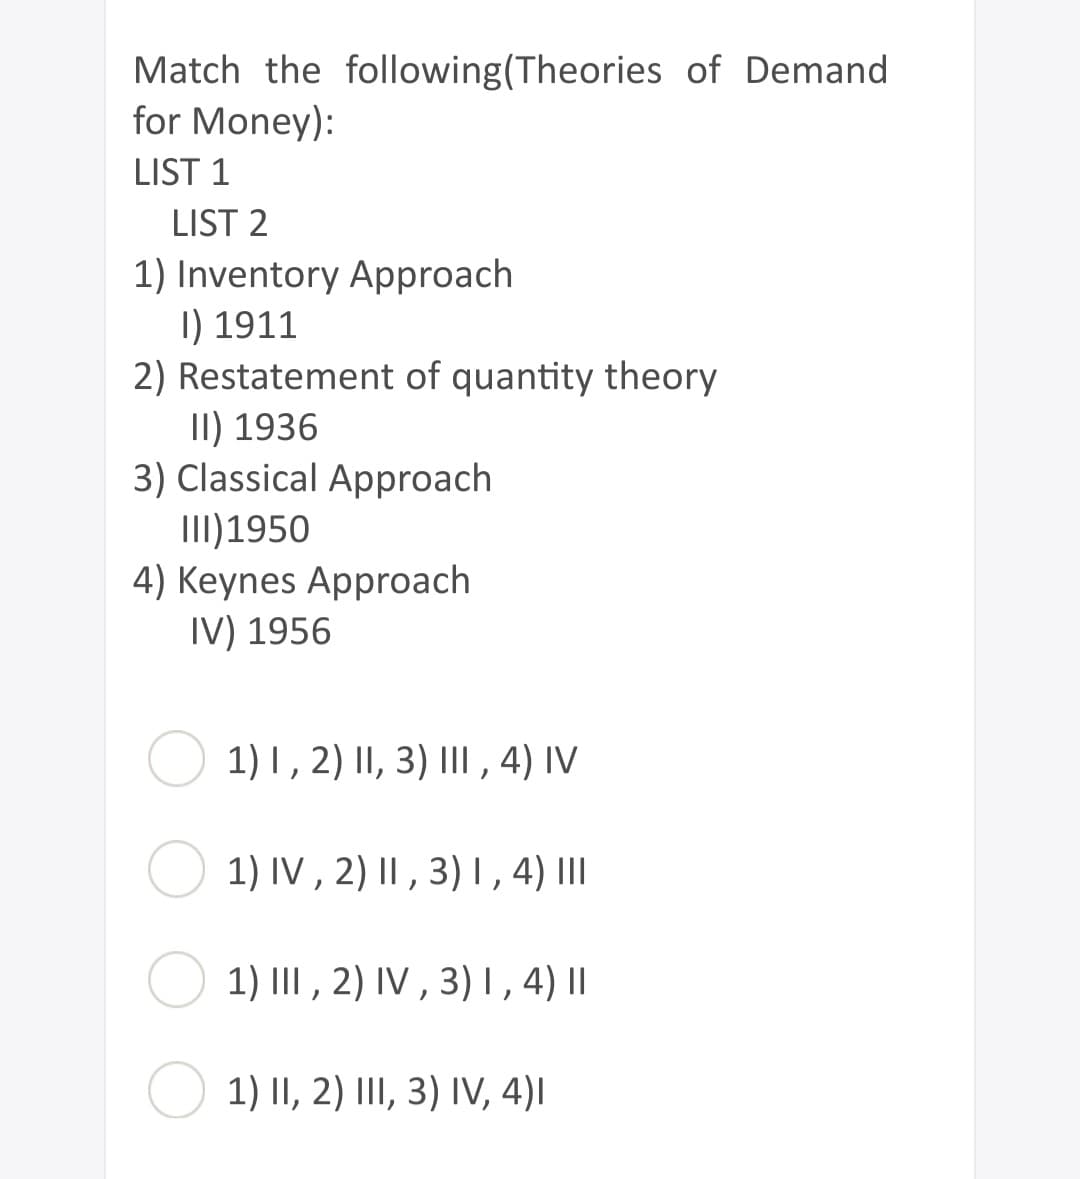 Match the following (Theories of Demand
for Money):
LIST 1
LIST 2
1) Inventory Approach
I) 1911
2) Restatement of quantity theory
II) 1936
3) Classical Approach
III) 1950
4) Keynes Approach
IV) 1956
1) I, 2) II, 3) III, 4) IV
1) IV, 2) II, 3) I, 4) III
1) III, 2) IV, 3) I, 4) ||
1) II, 2) III, 3) IV, 4)I